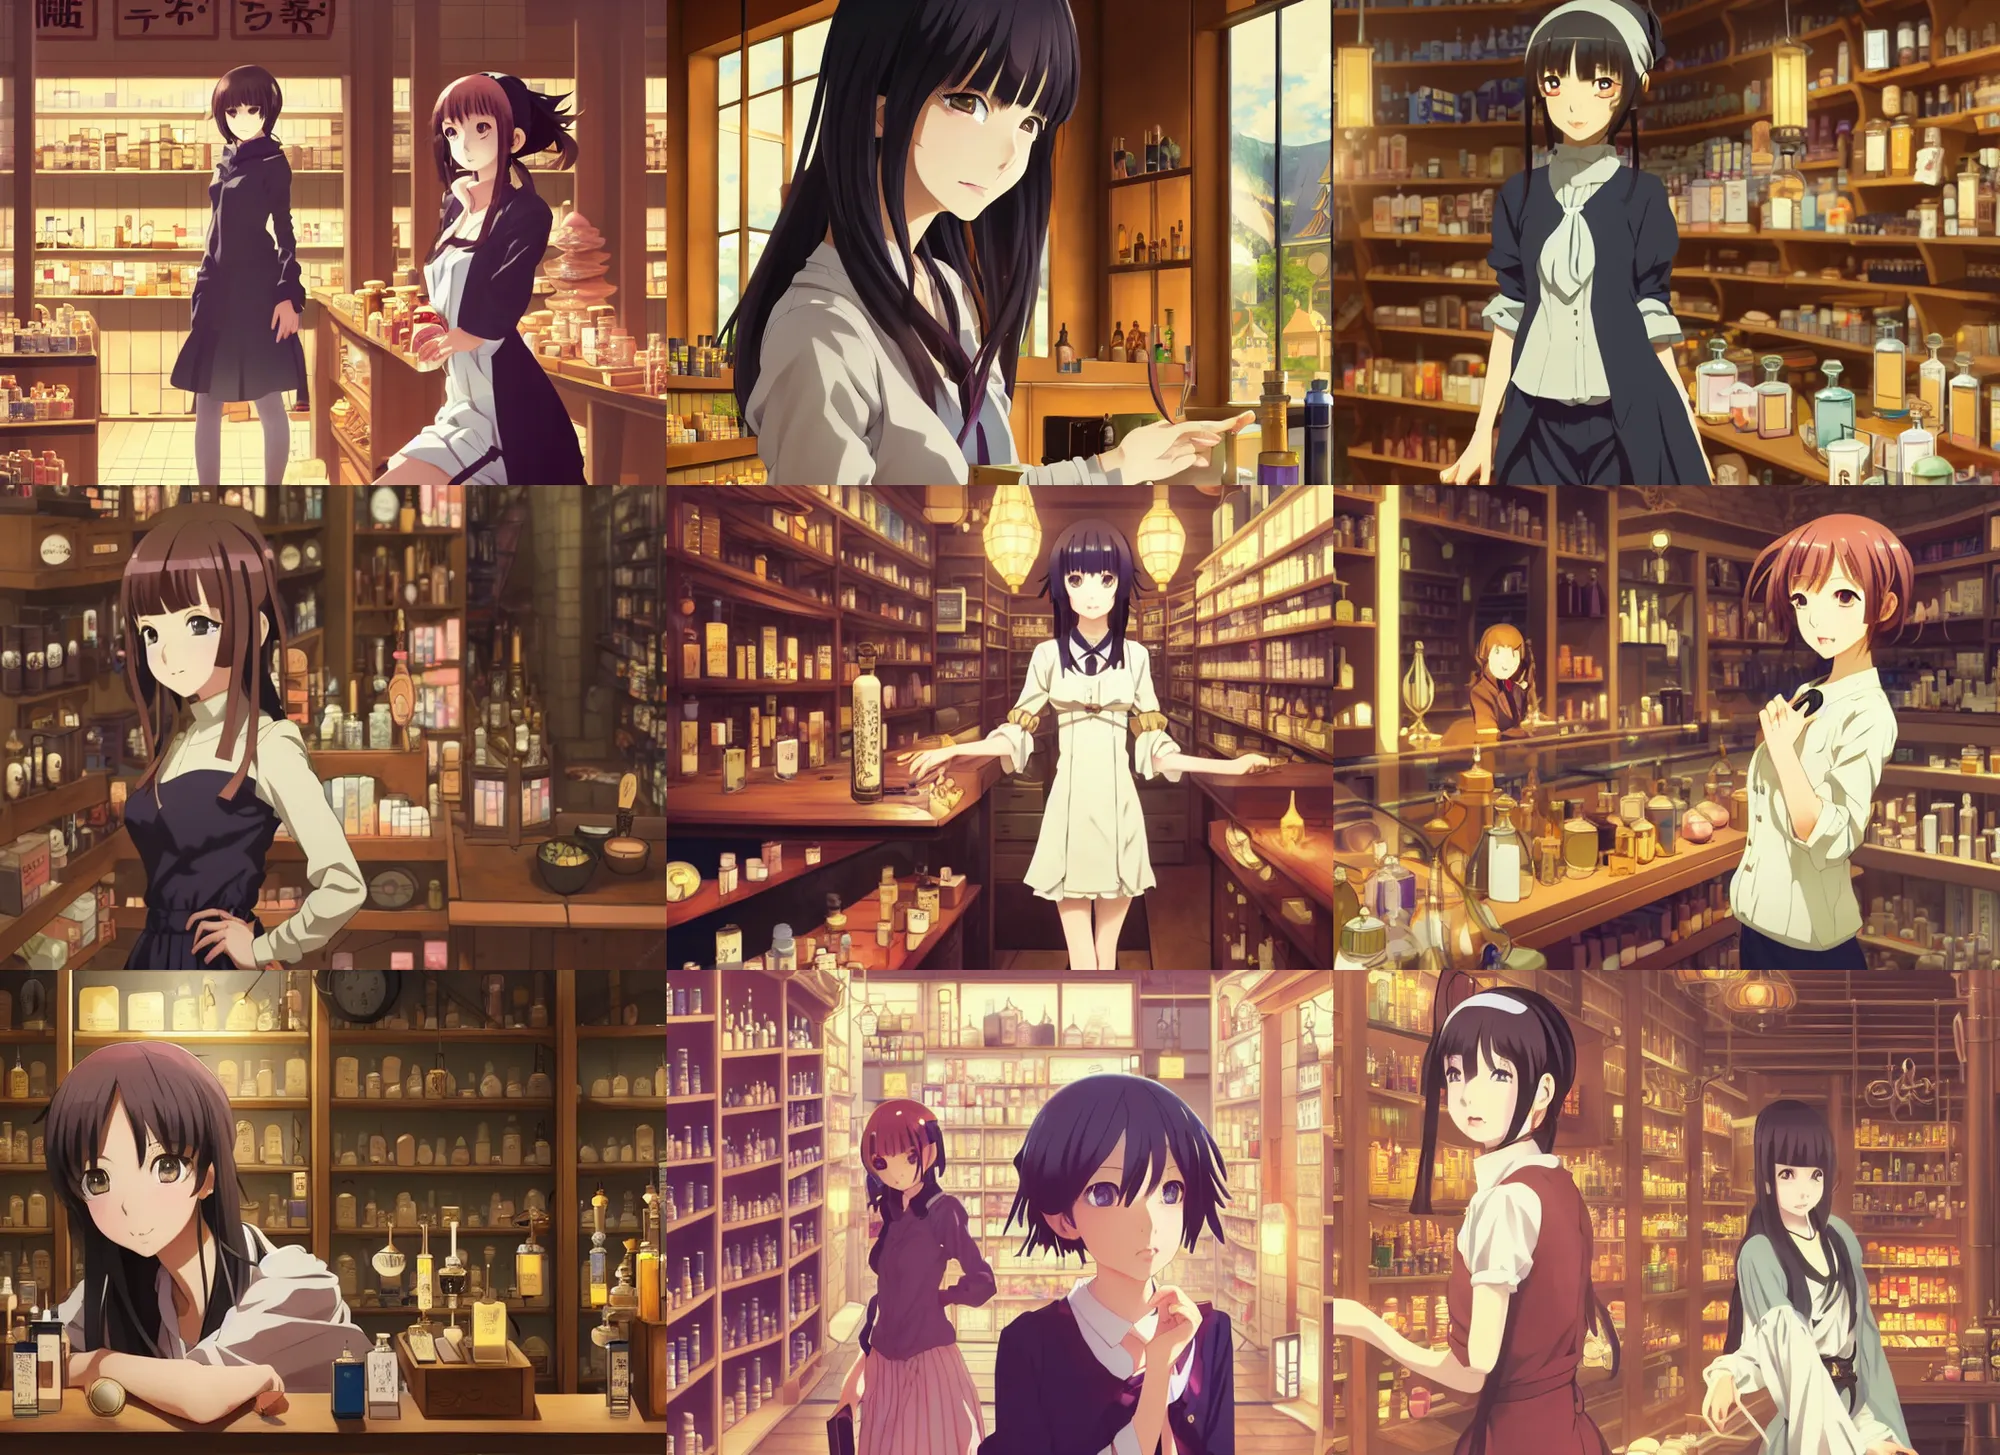 Prompt: anime visual, portrait of a young female traveler in a alchemist's potion shop interior shopping, low light, cute face by ilya kuvshinov, yoh yoshinari, makoto shinkai, katsura masakazu, dynamic pose, dynamic perspective, cel shaded, flat shading mucha, crisp smooth clean lines, rounded eyes, moody, detailed facial features